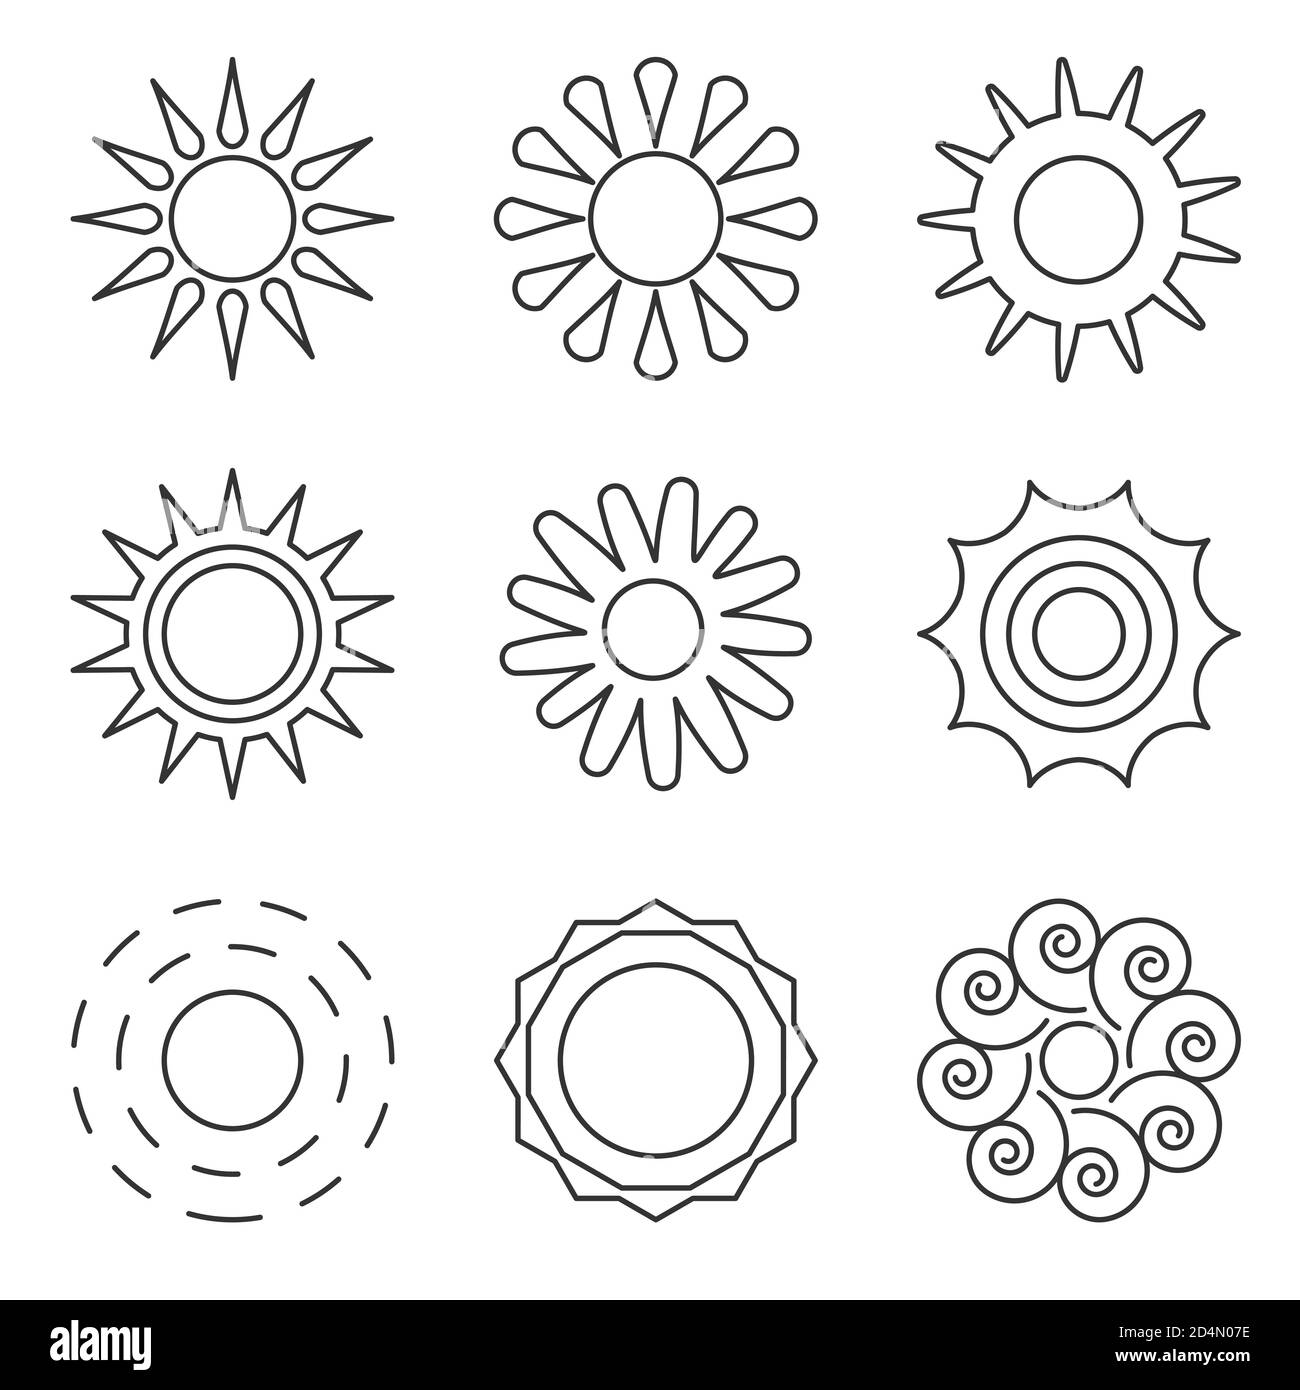 Sun outline Black and White Stock Photos & Images - Alamy